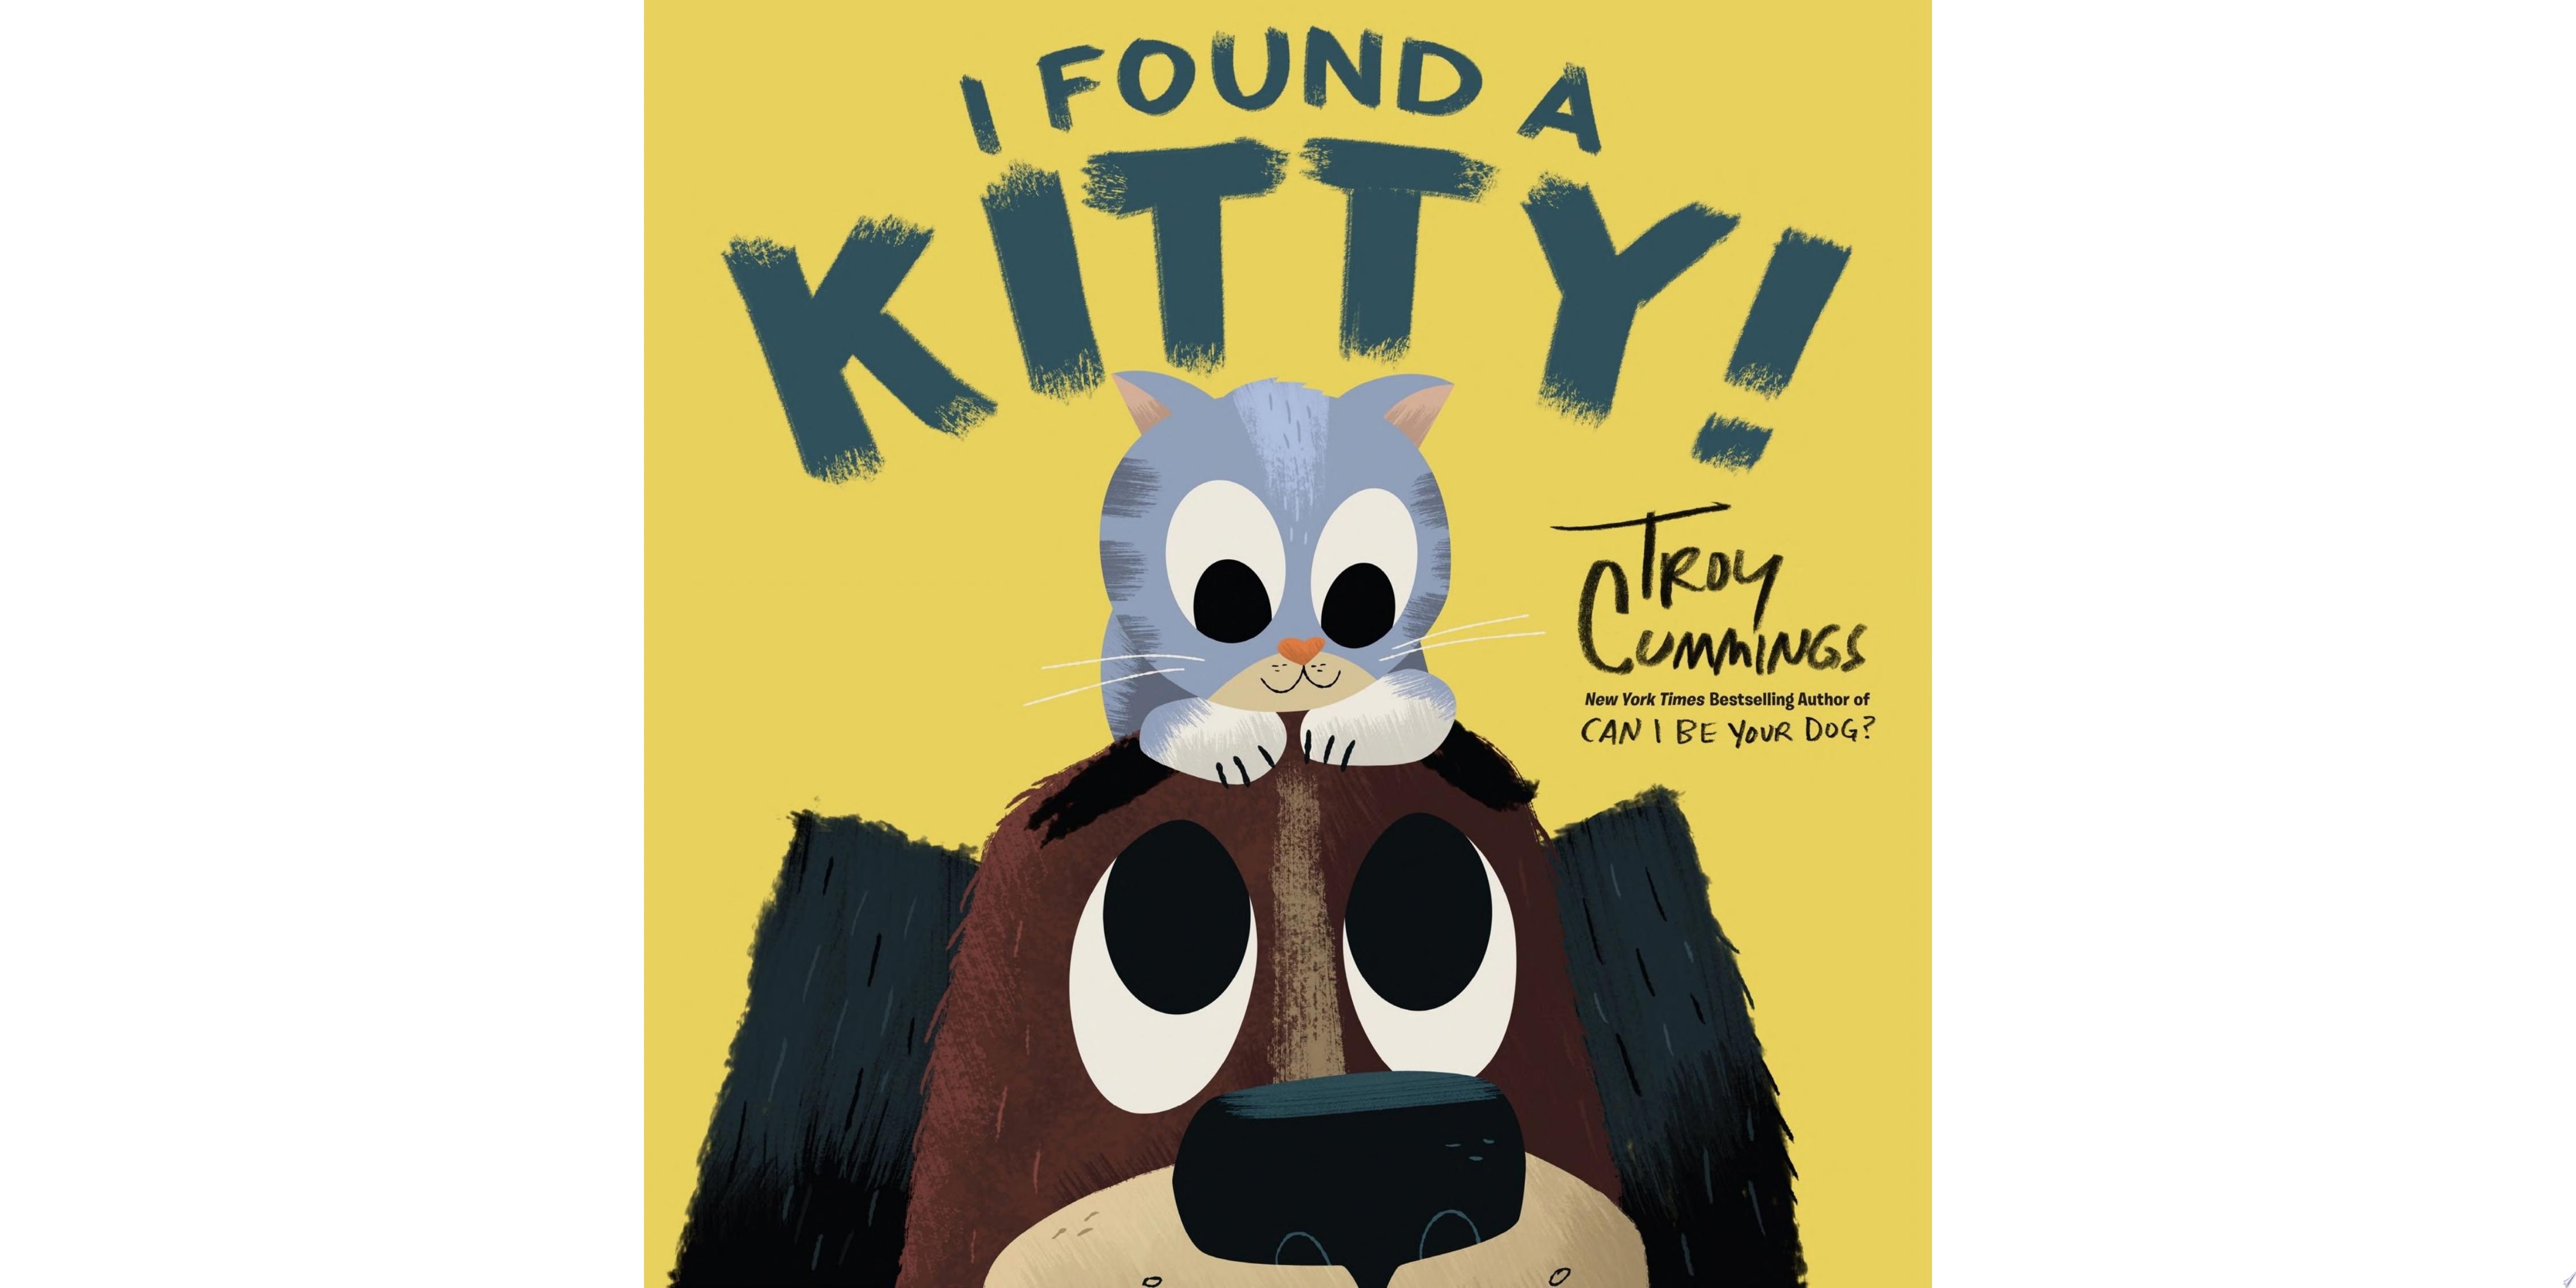 Image for "I Found A Kitty!"